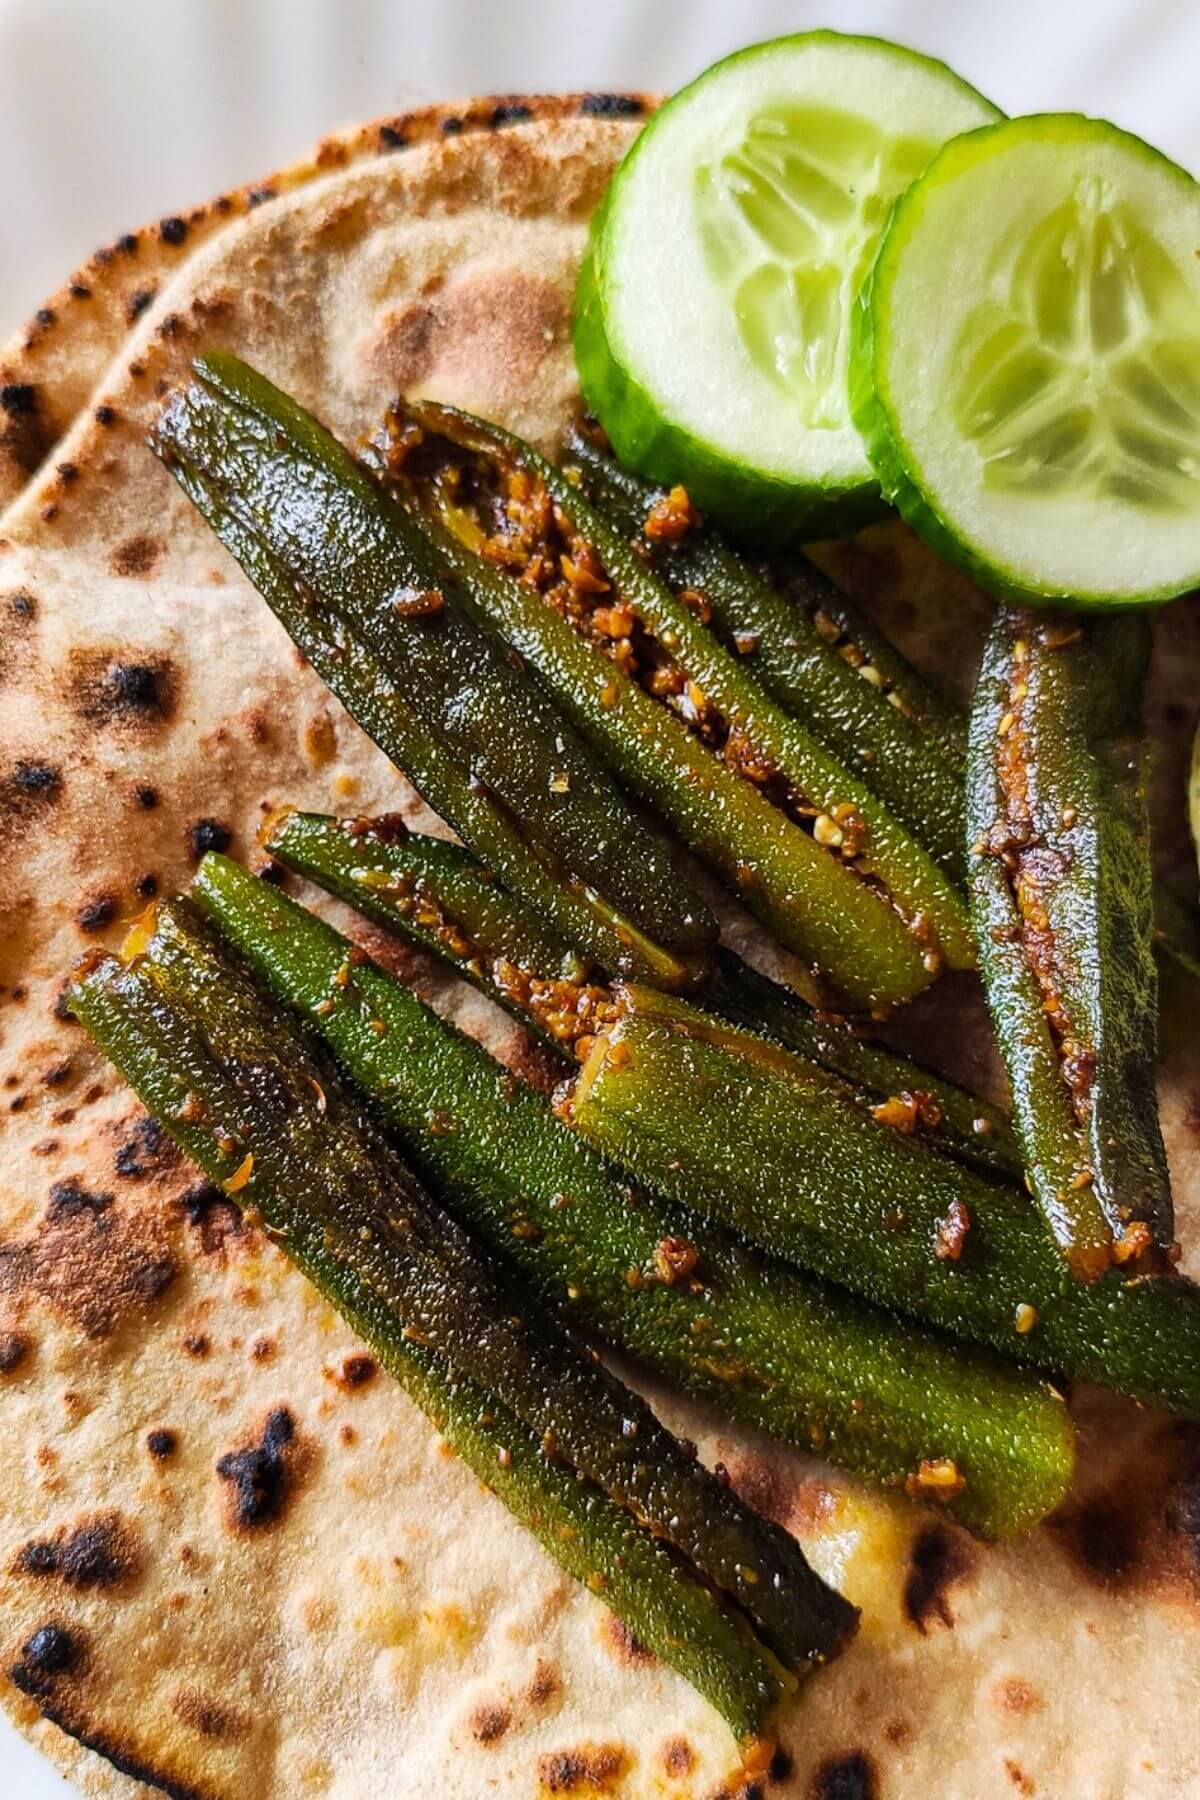 stuffed bhindi and cucumber slices served on top of roti.